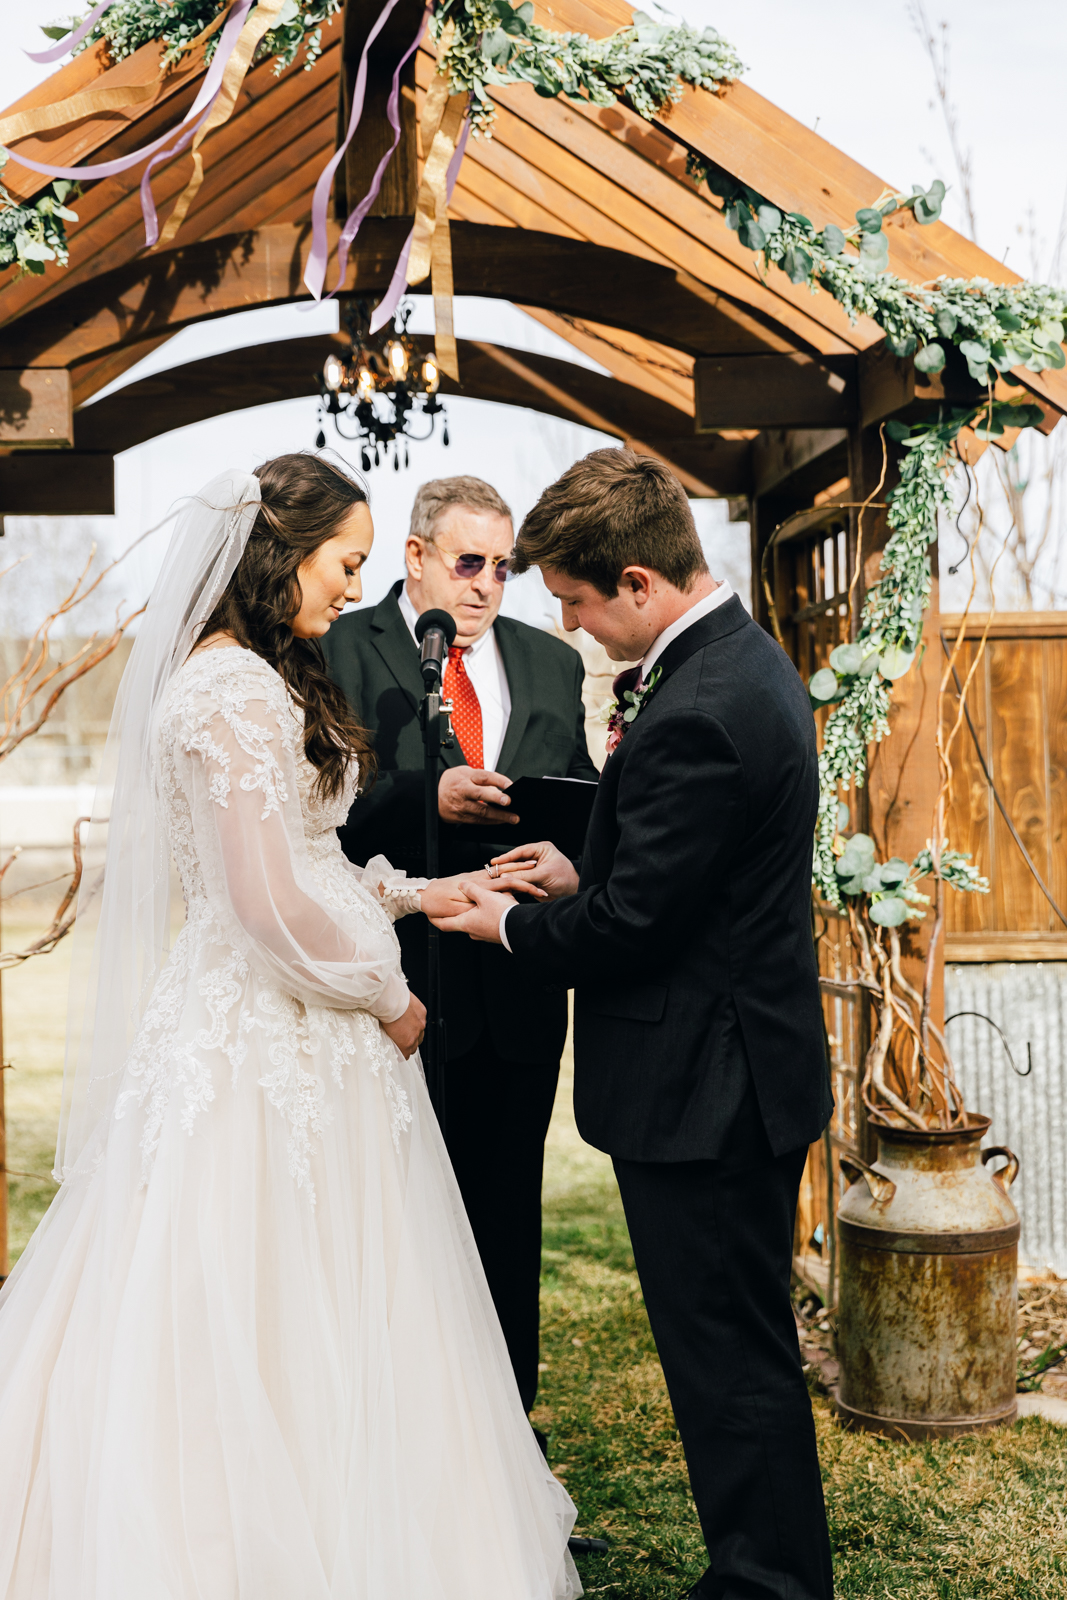 Jackson Hole wedding photographer captures bride and groom during wedding ceremony at the Barn on 1st